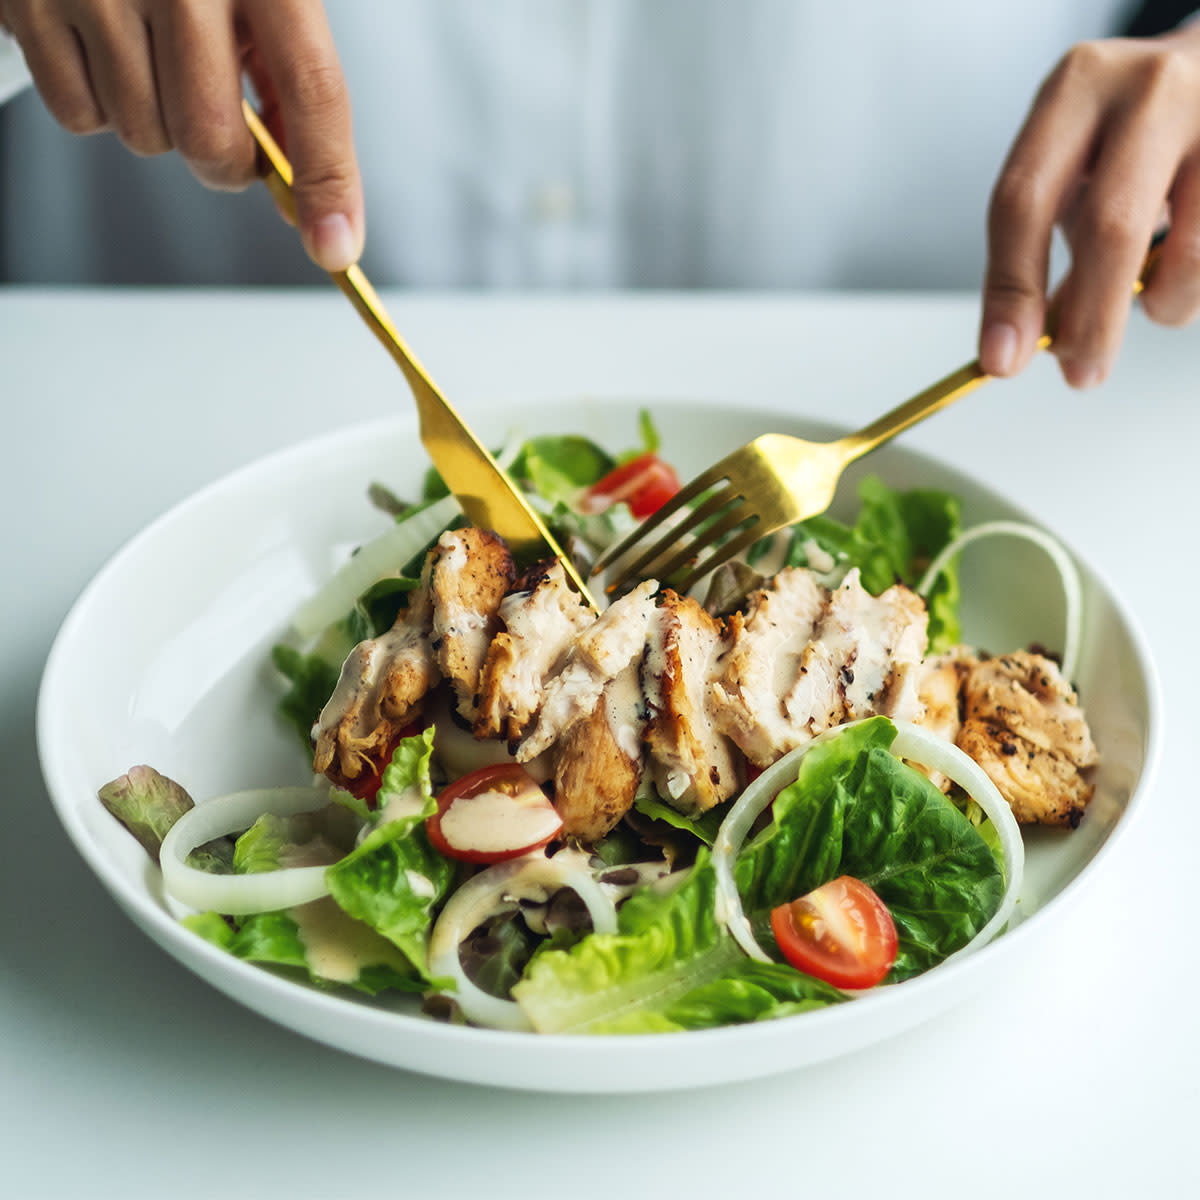 closeup of woman cutting into grilled chicken salad